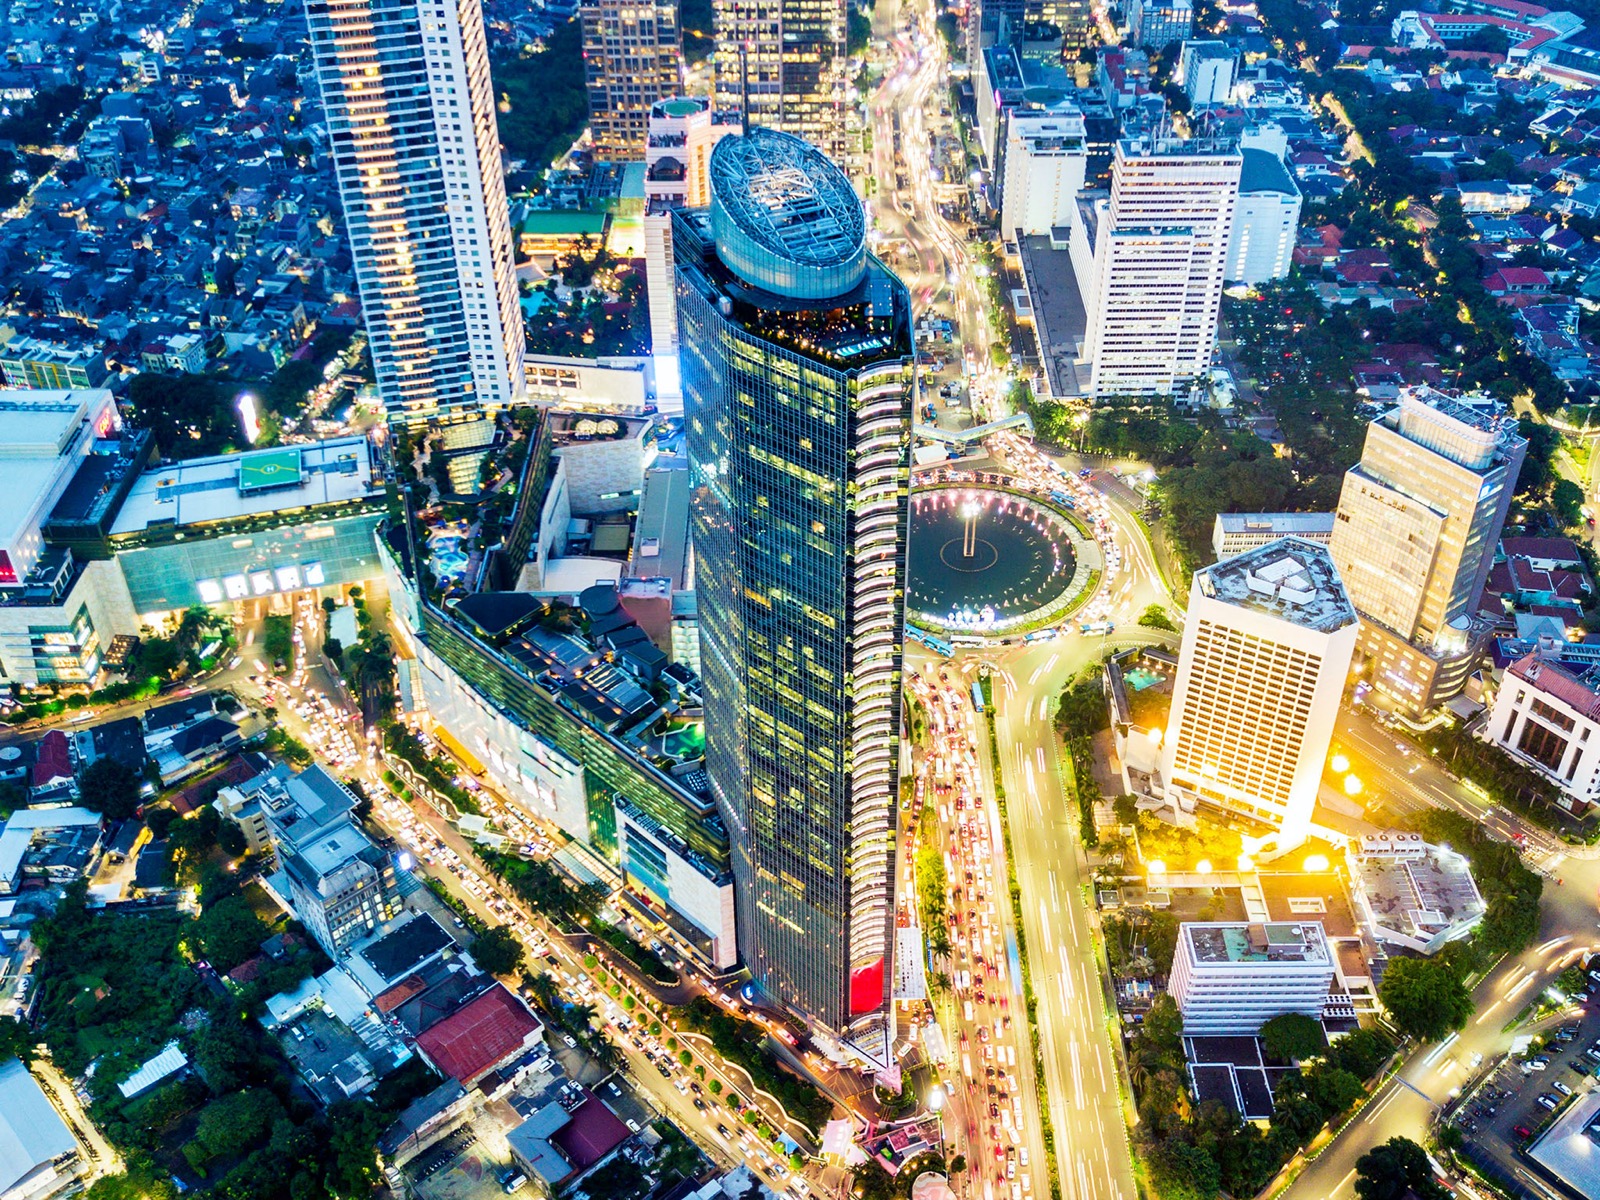 Name That City! Put Your Travel Knowledge to Test With This Picture Quiz! Jakarta, Indonesia